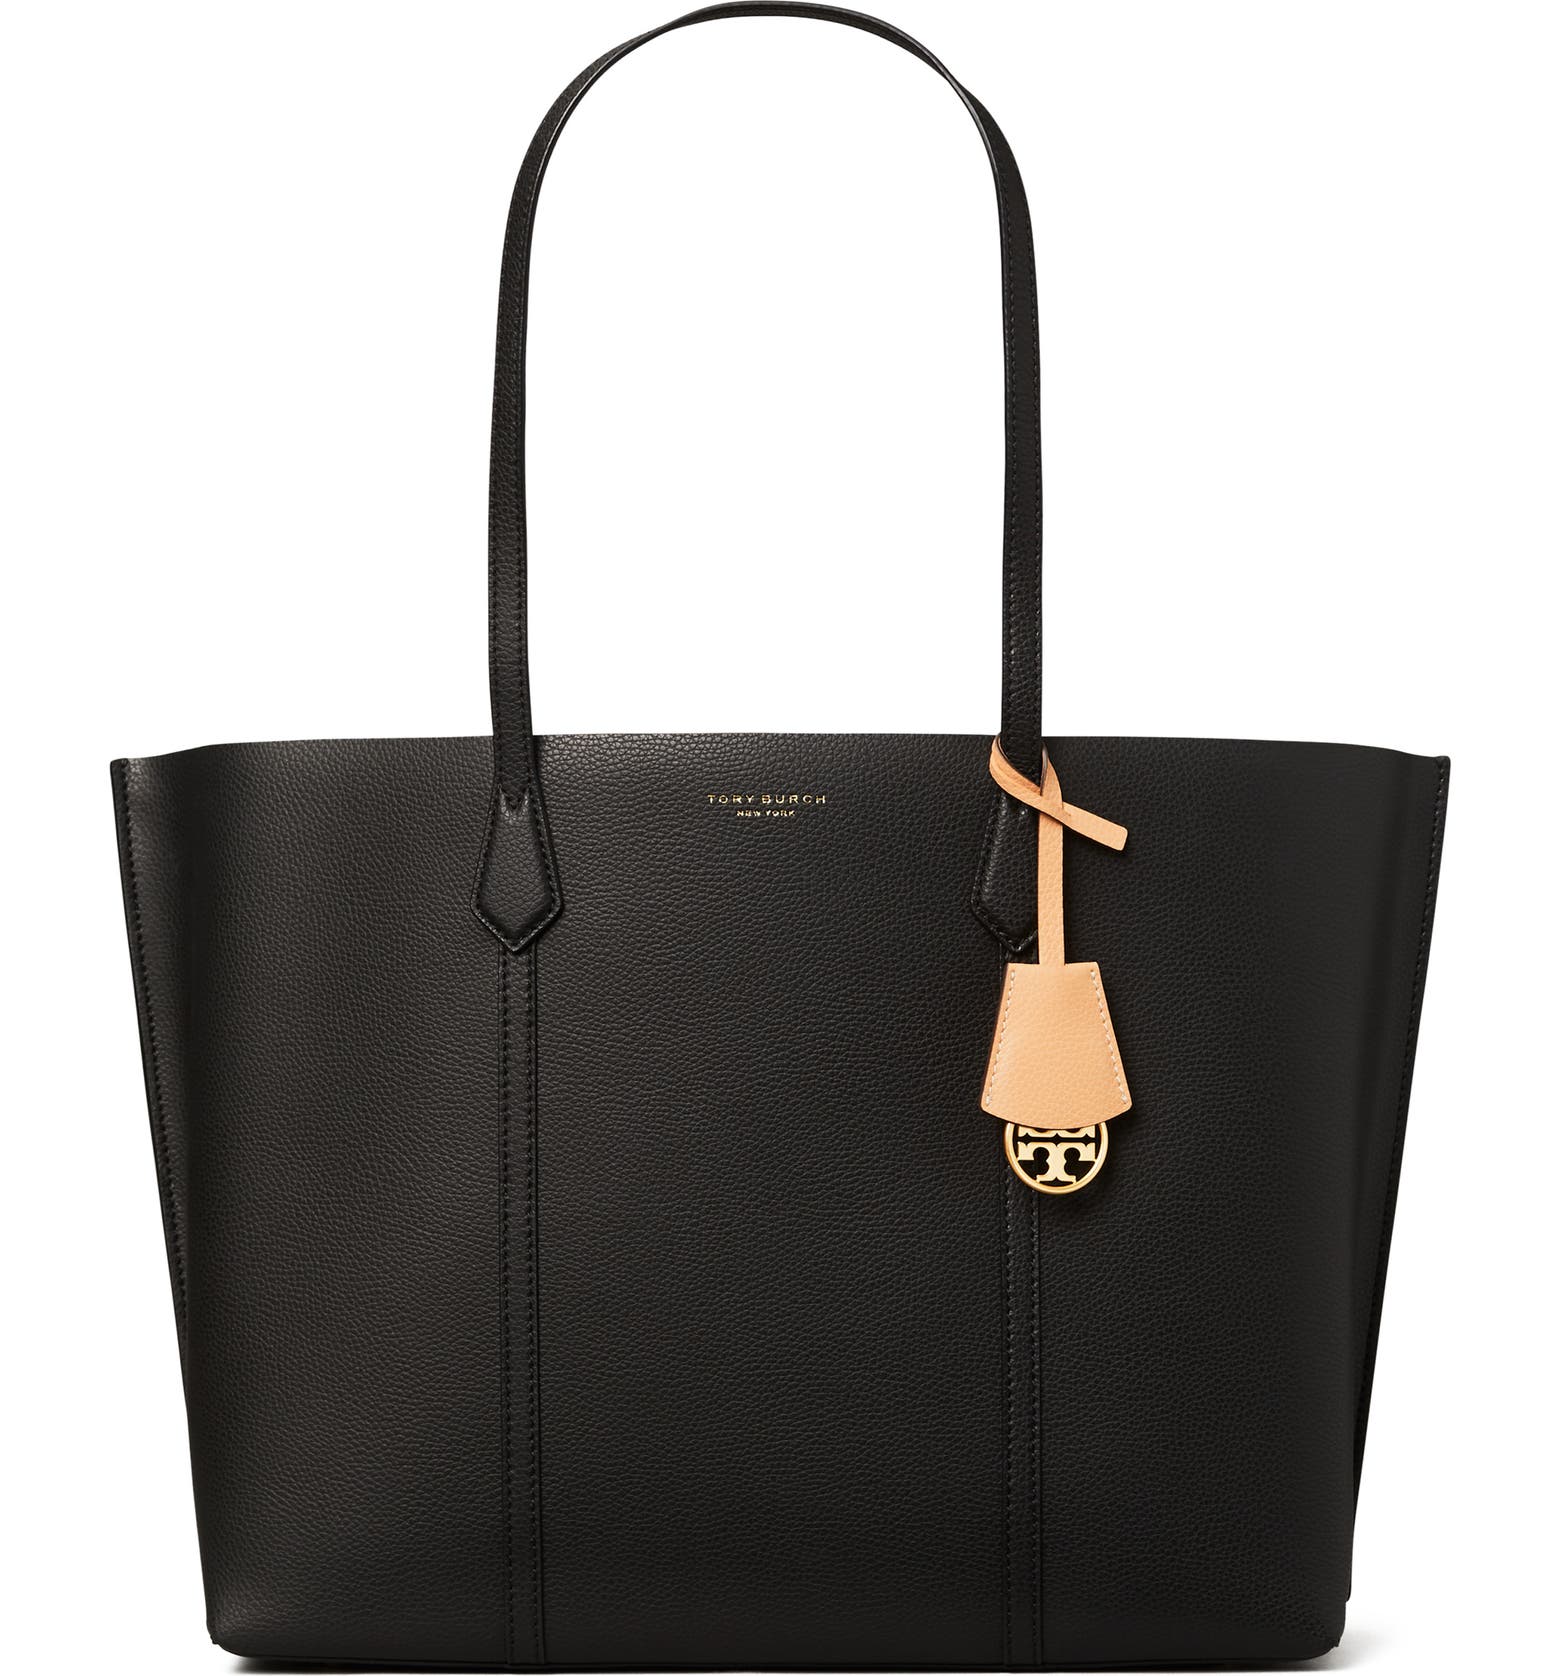 Tory Burch’s Perry Triple-Compartment Tote Bag